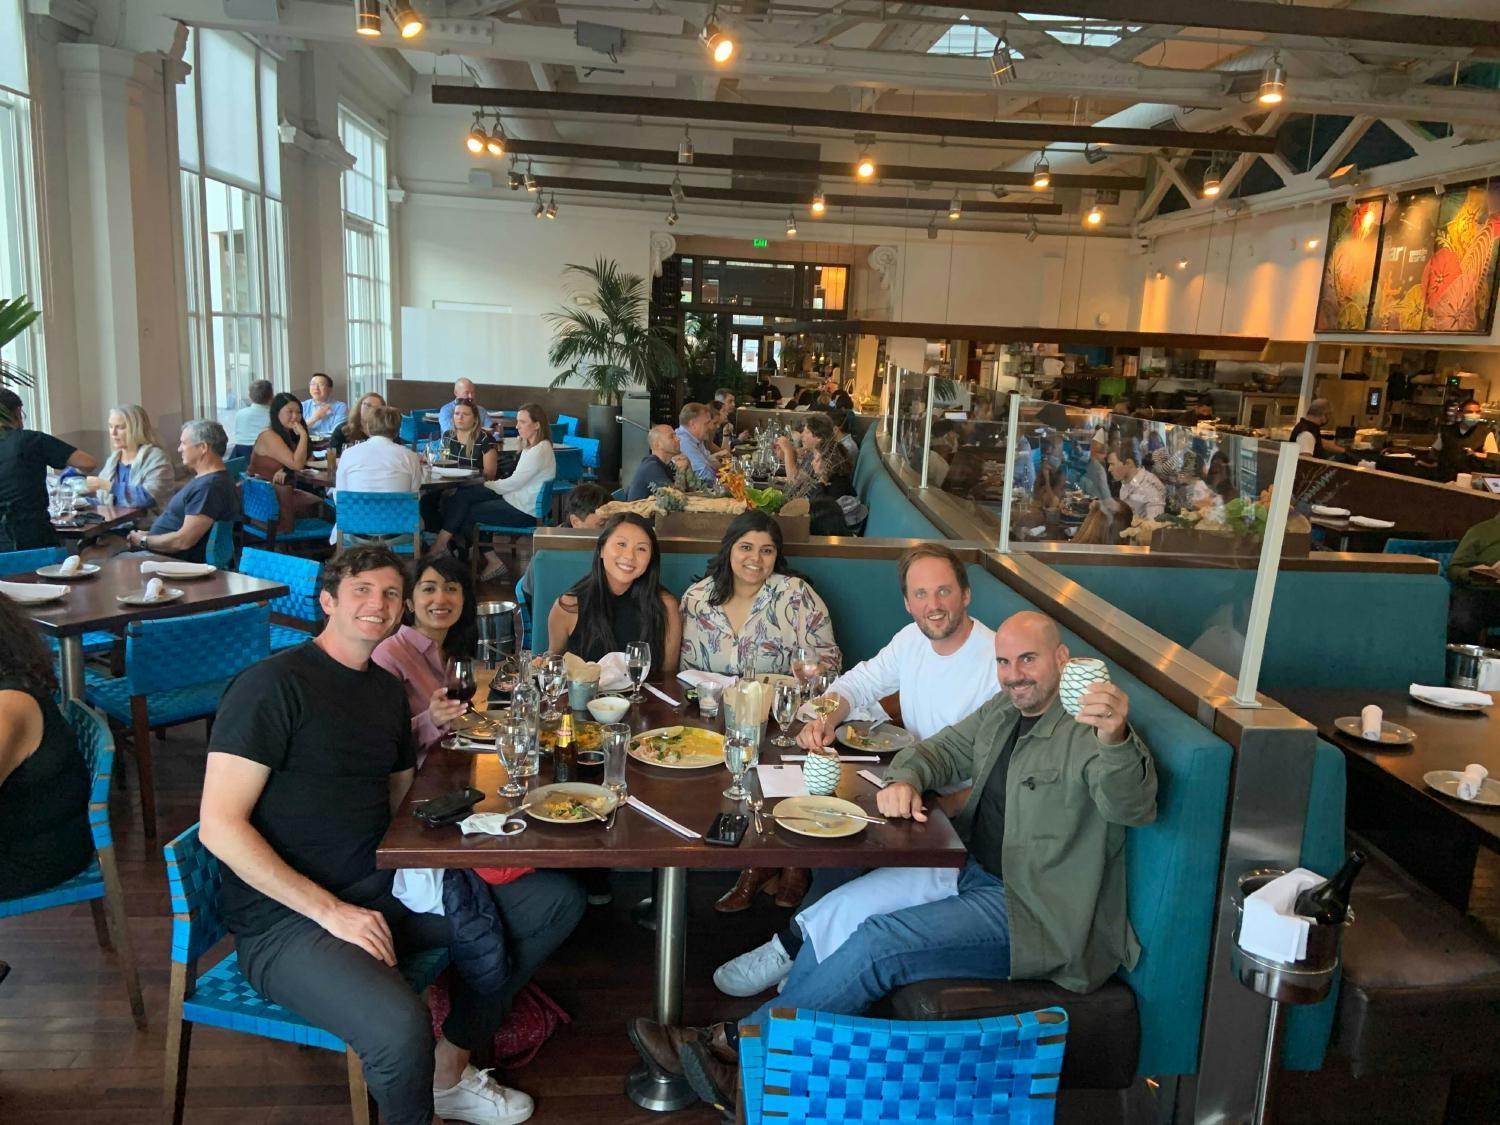 The SF team getting together for dinner